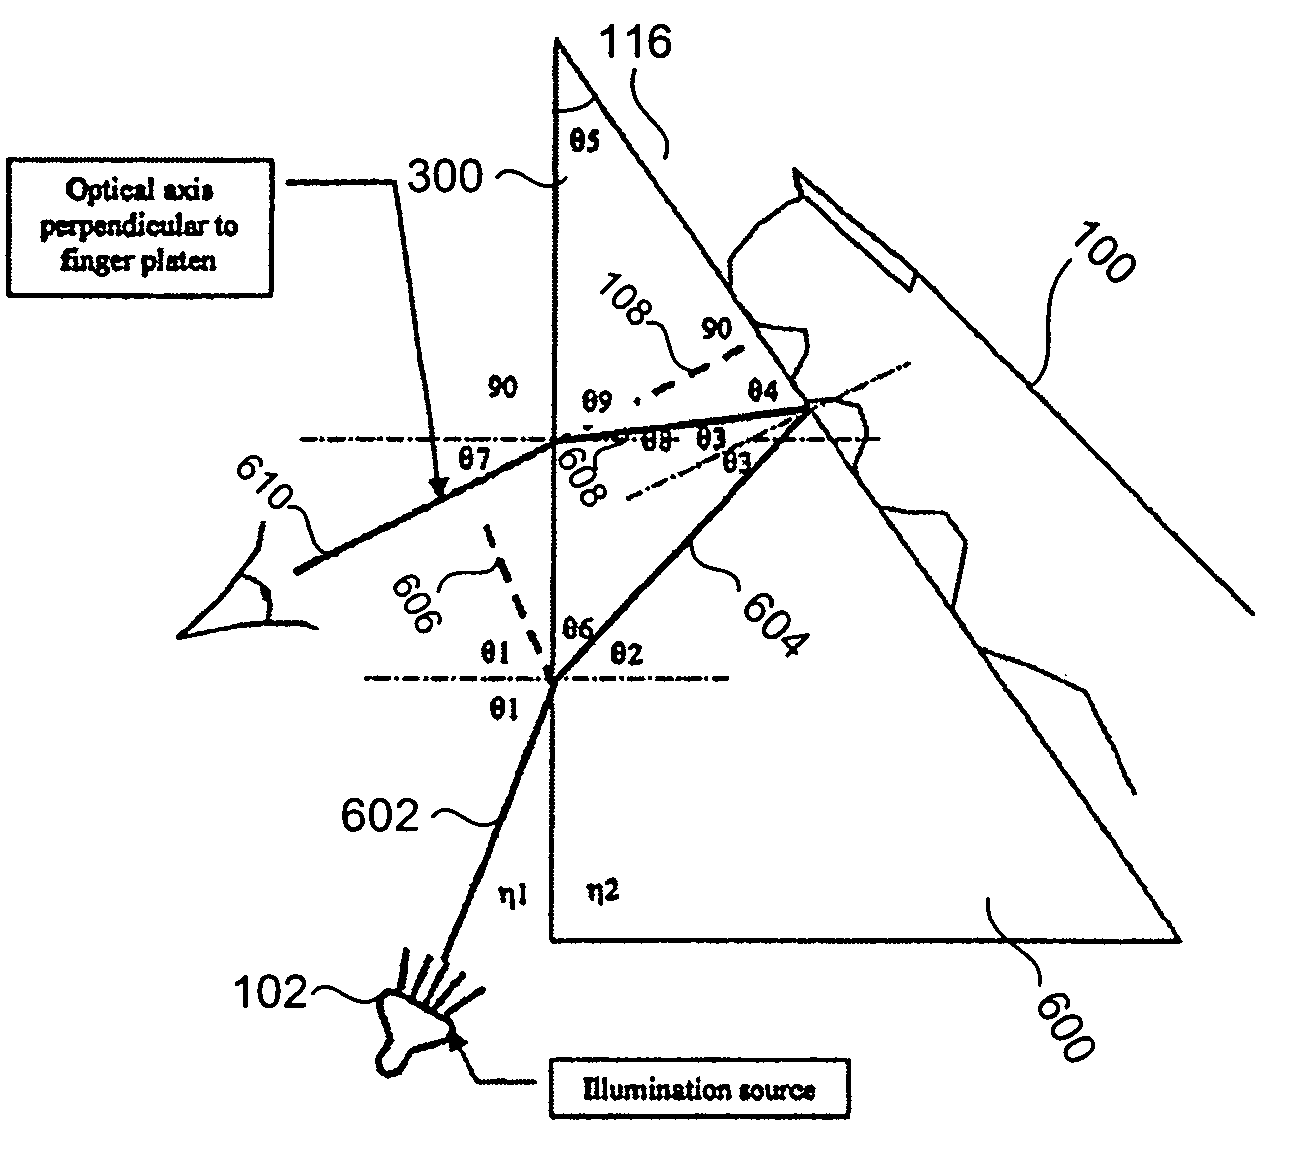 Apparatus and method for obtaining images using a prism